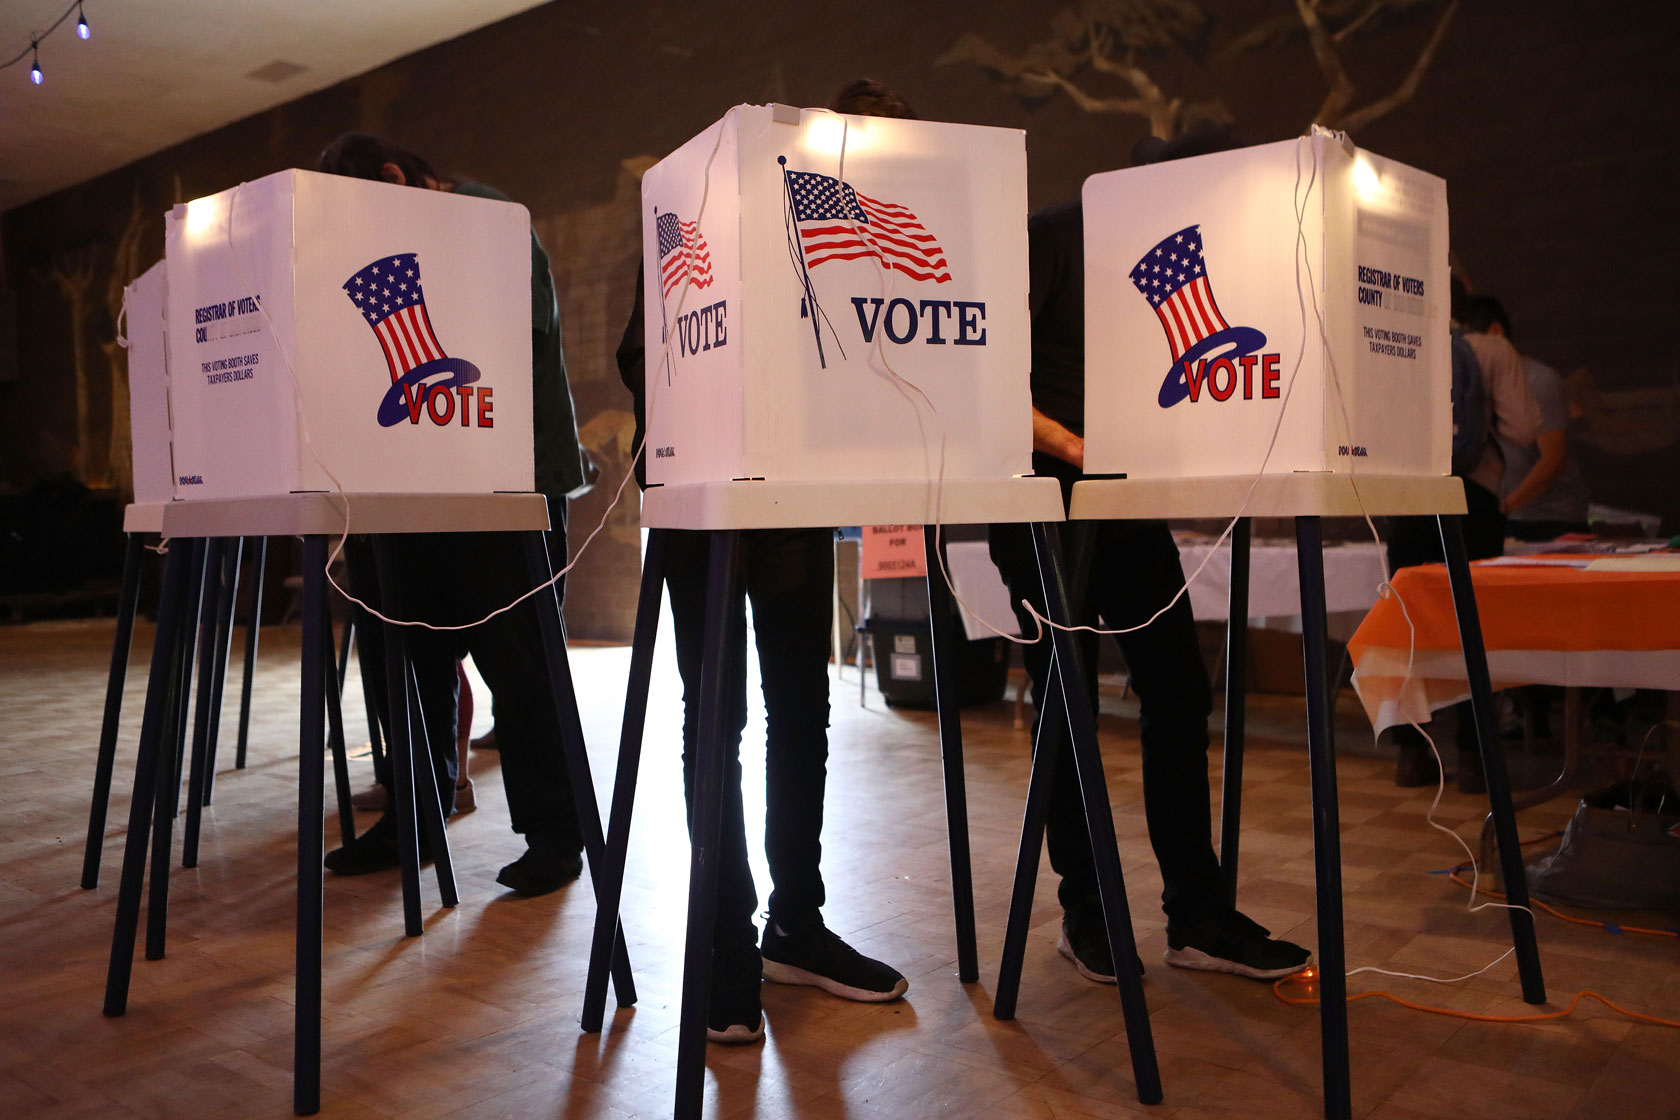 A group of voters is seen filling out their ballots in voting booths at a polling place.